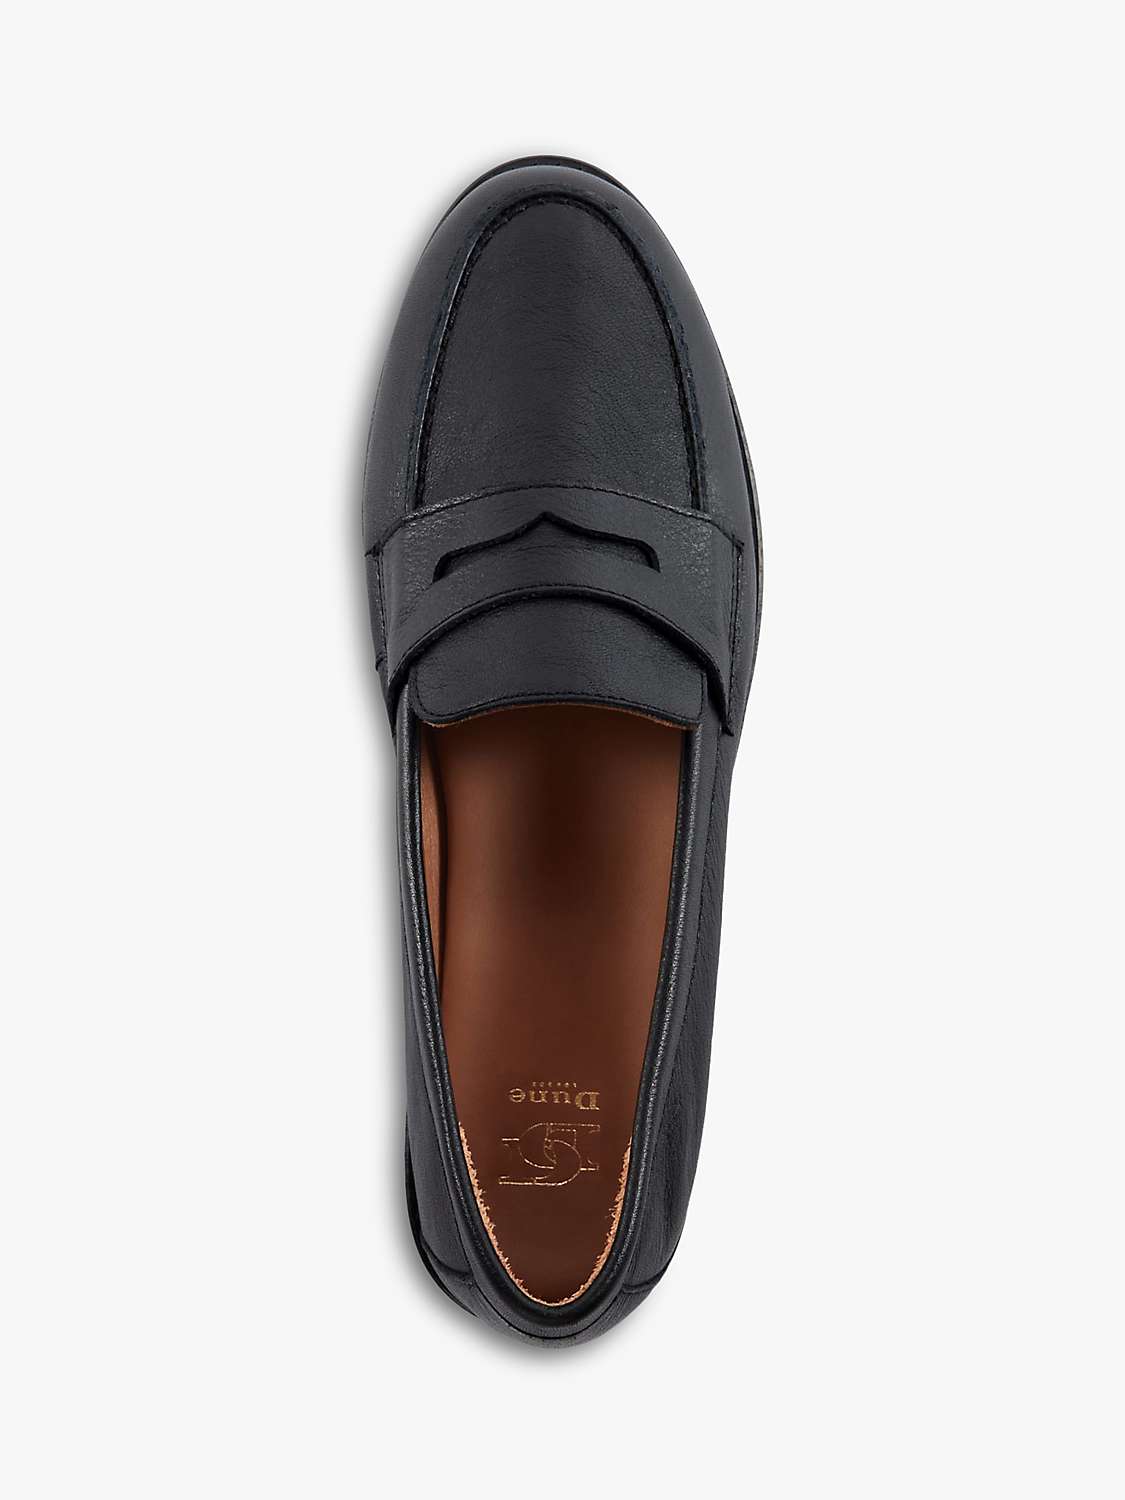 Buy Dune Ginelli Leather Penny Loafers, Black Online at johnlewis.com